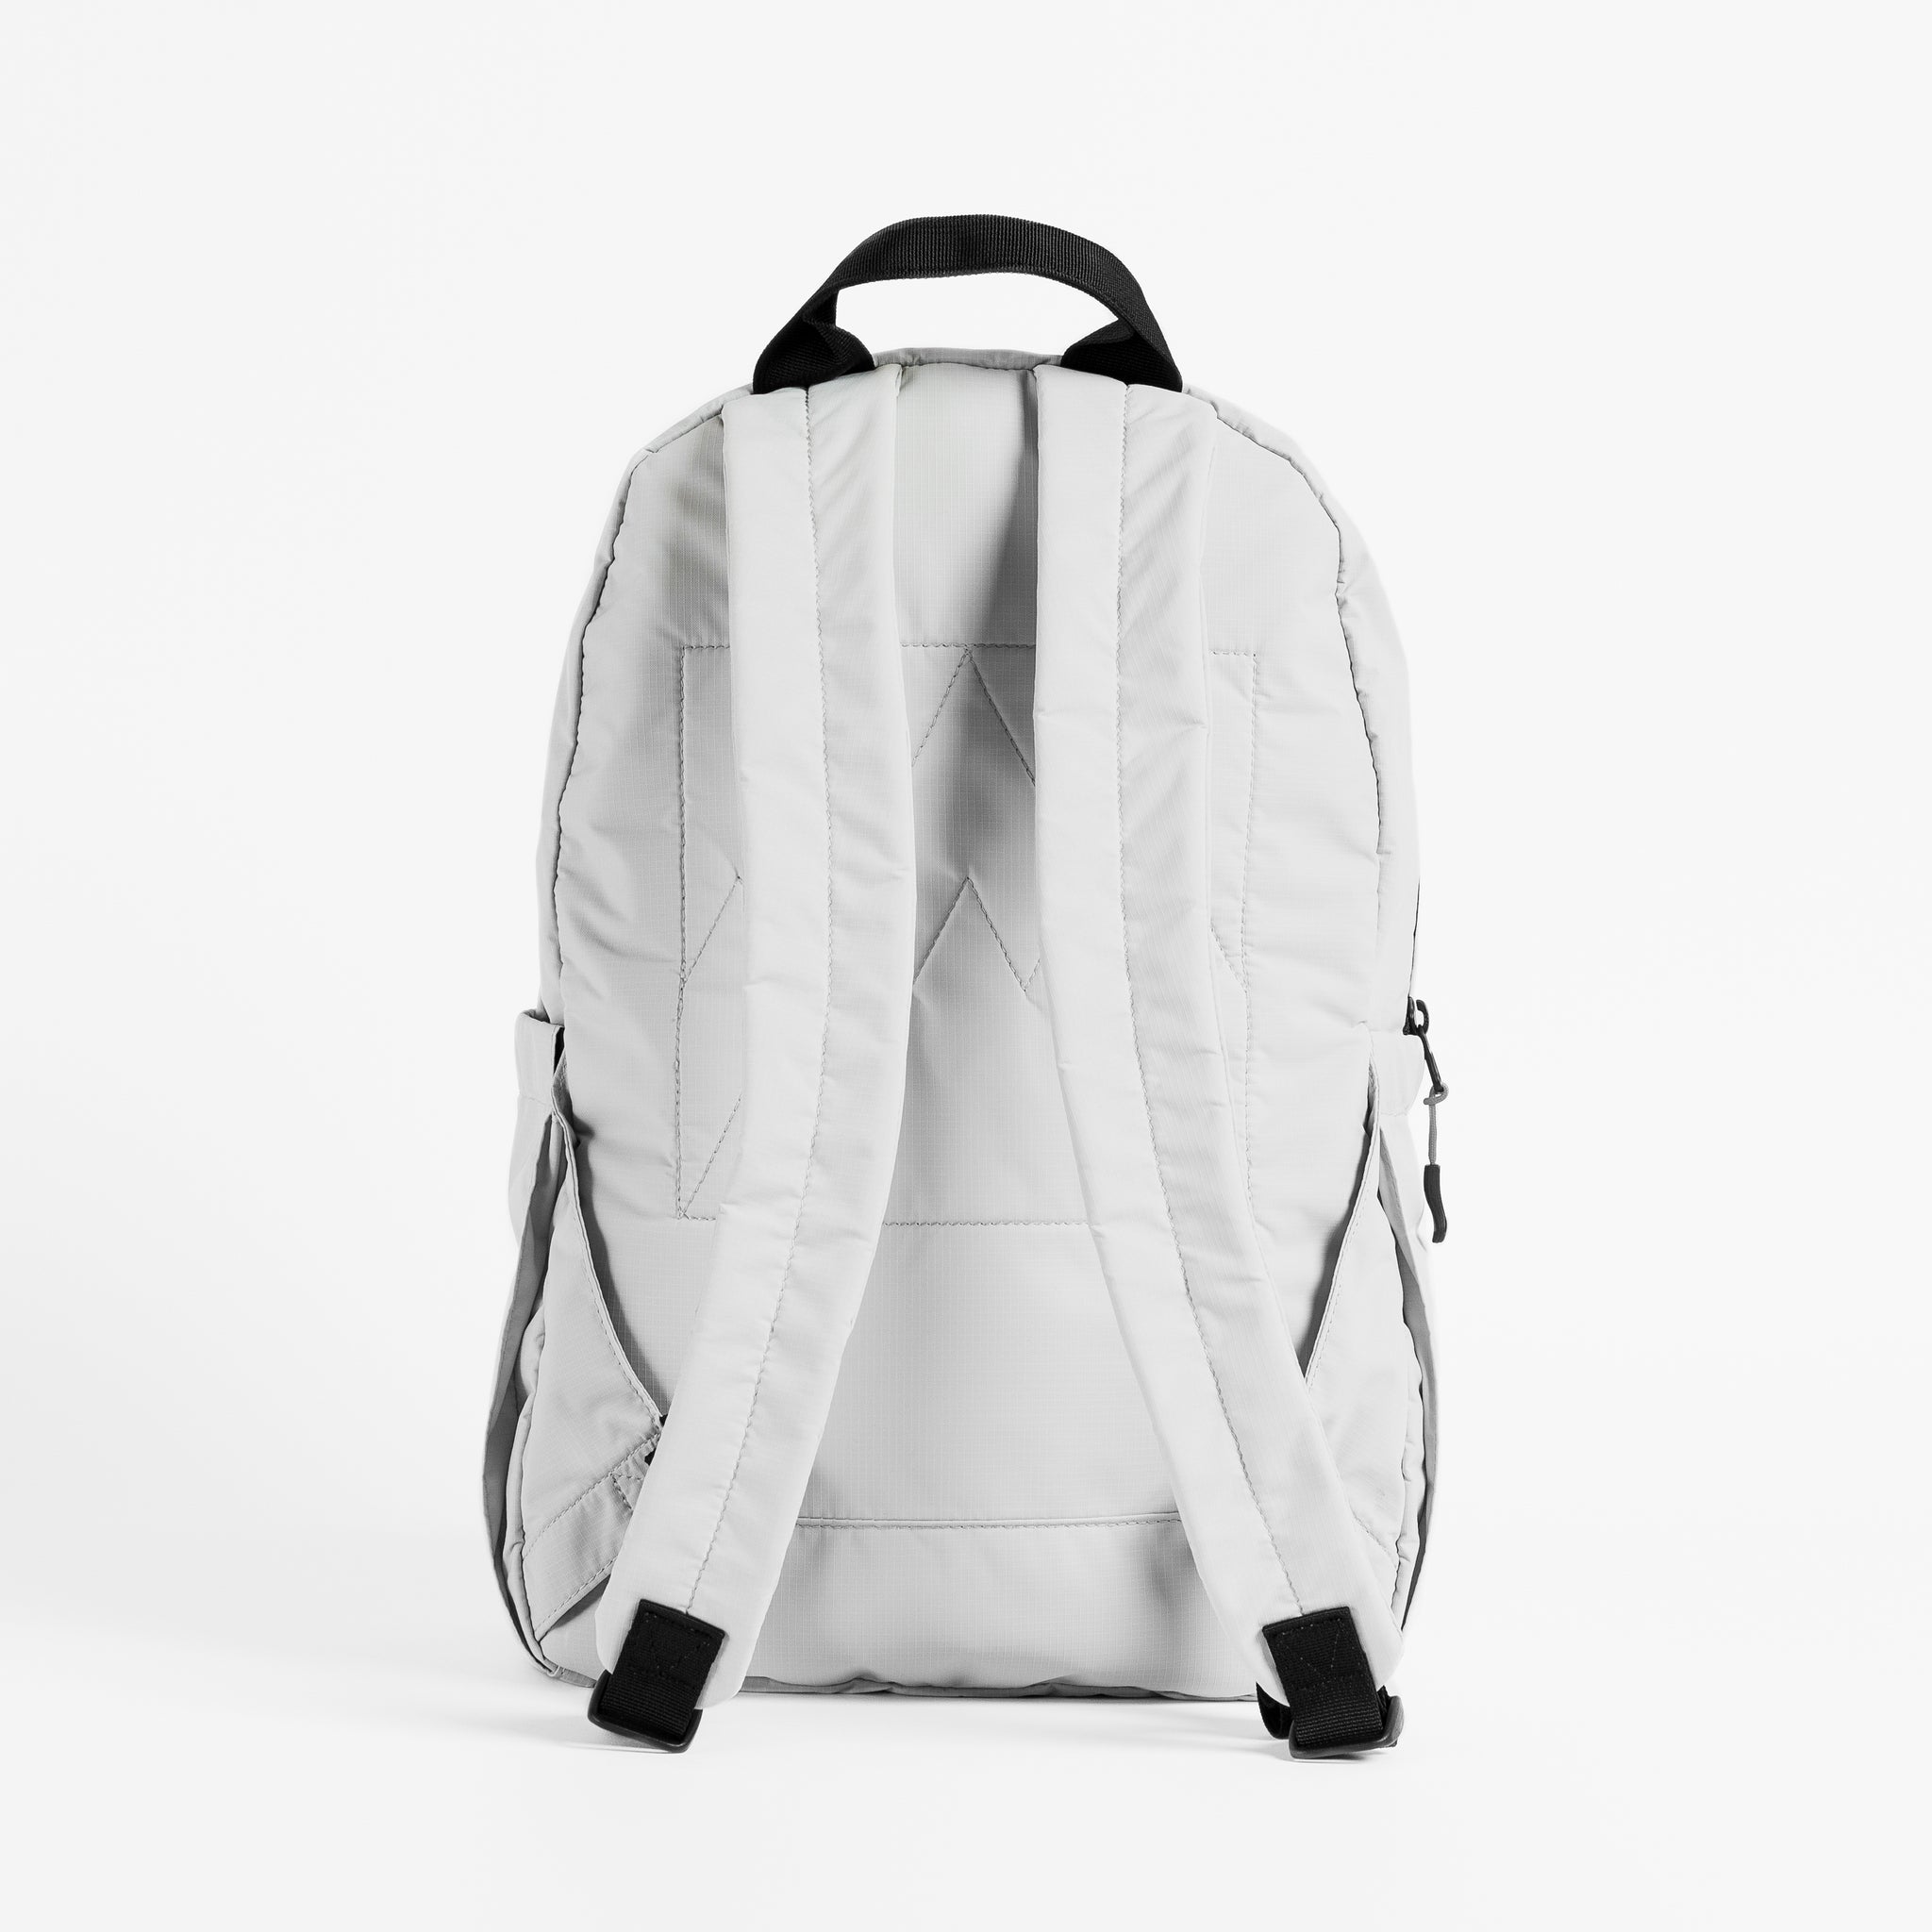 Back view of the packable Off White Ultra Light Backpack